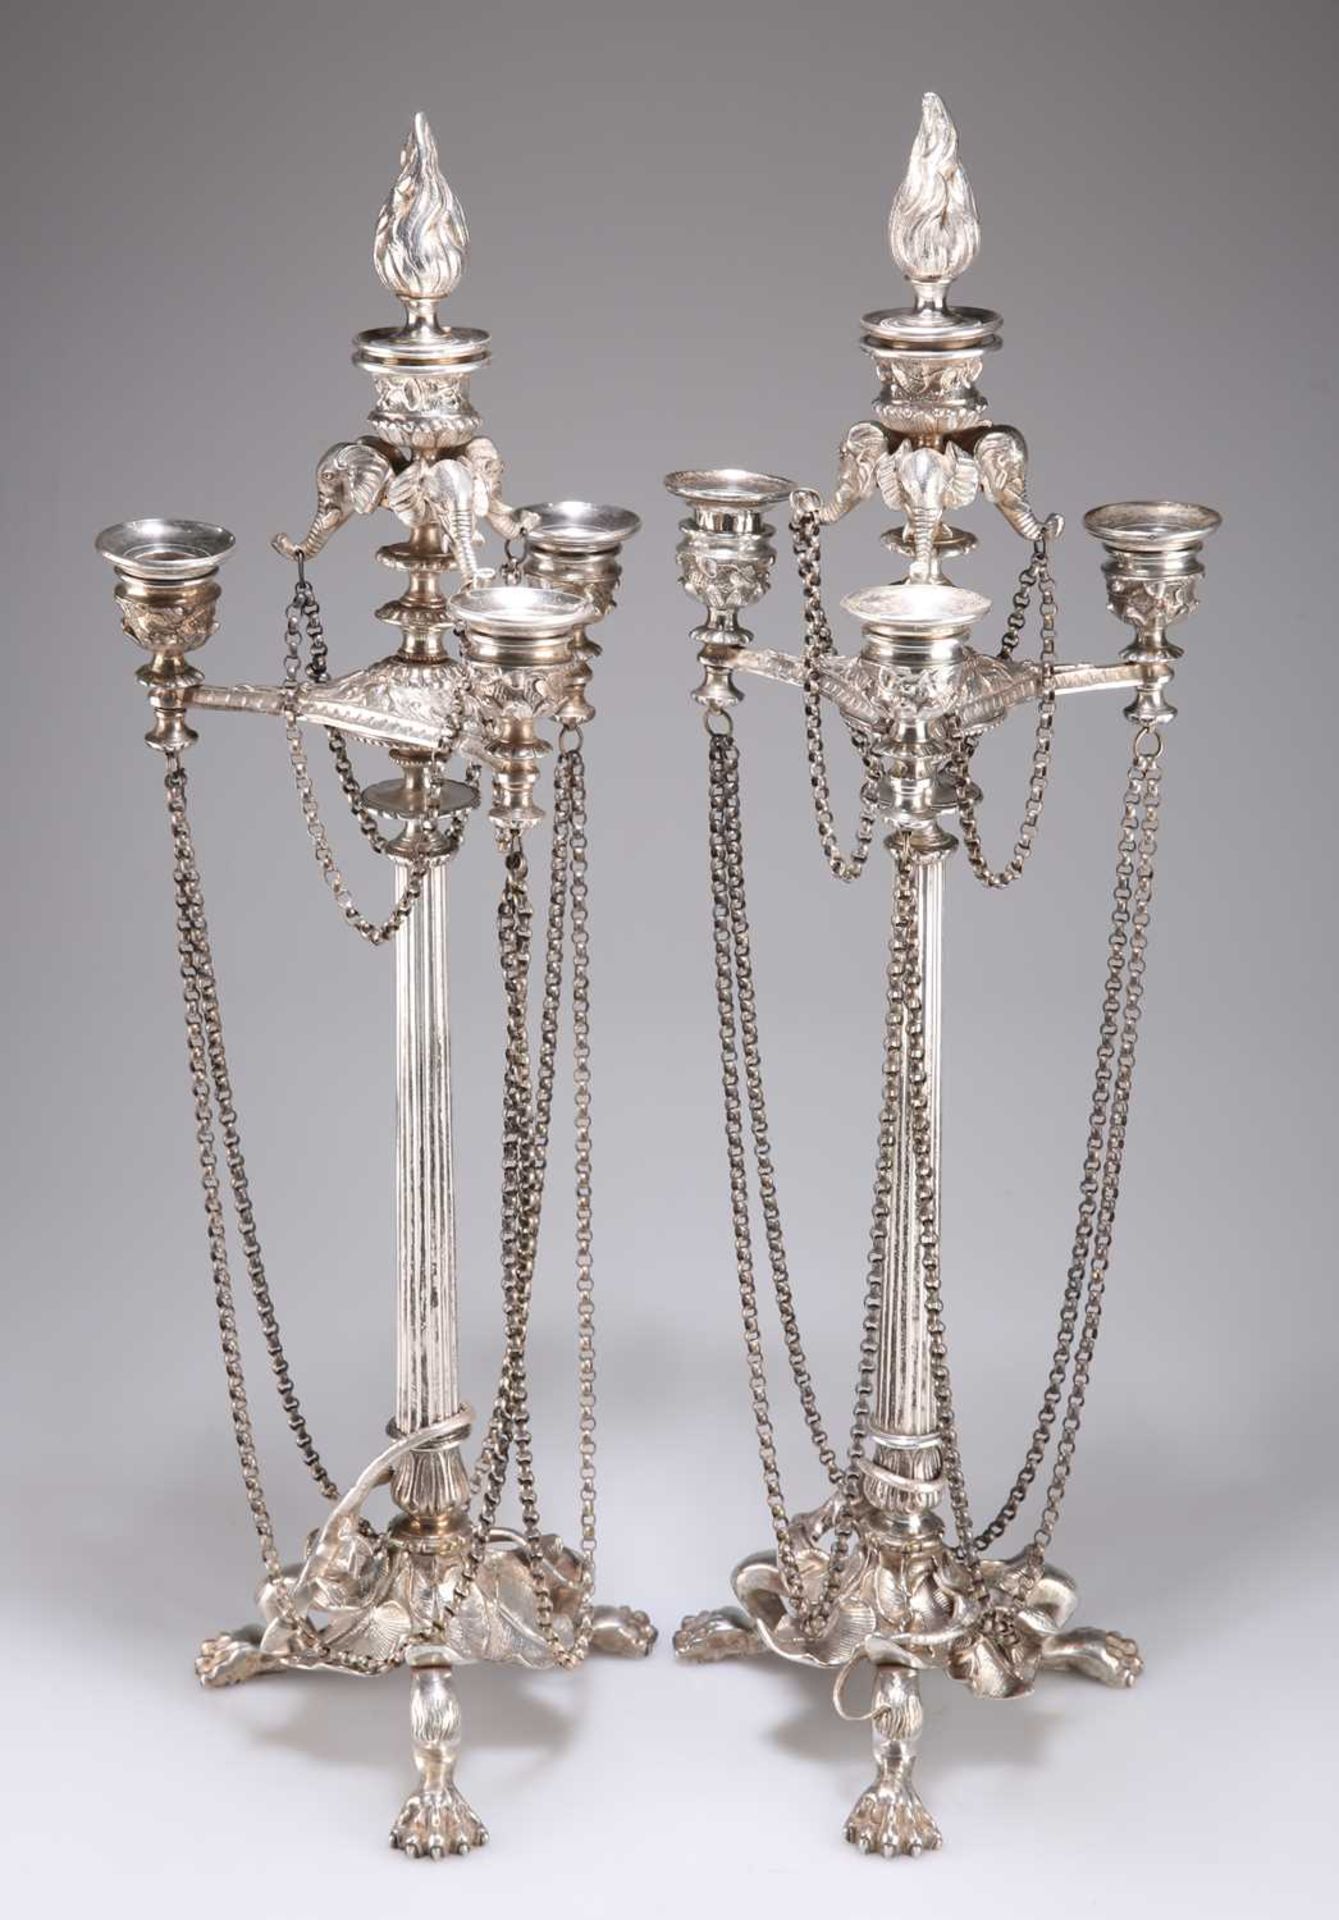 A PAIR OF 19TH CENTURY SILVER-PLATED CANDELABRA - Image 2 of 4